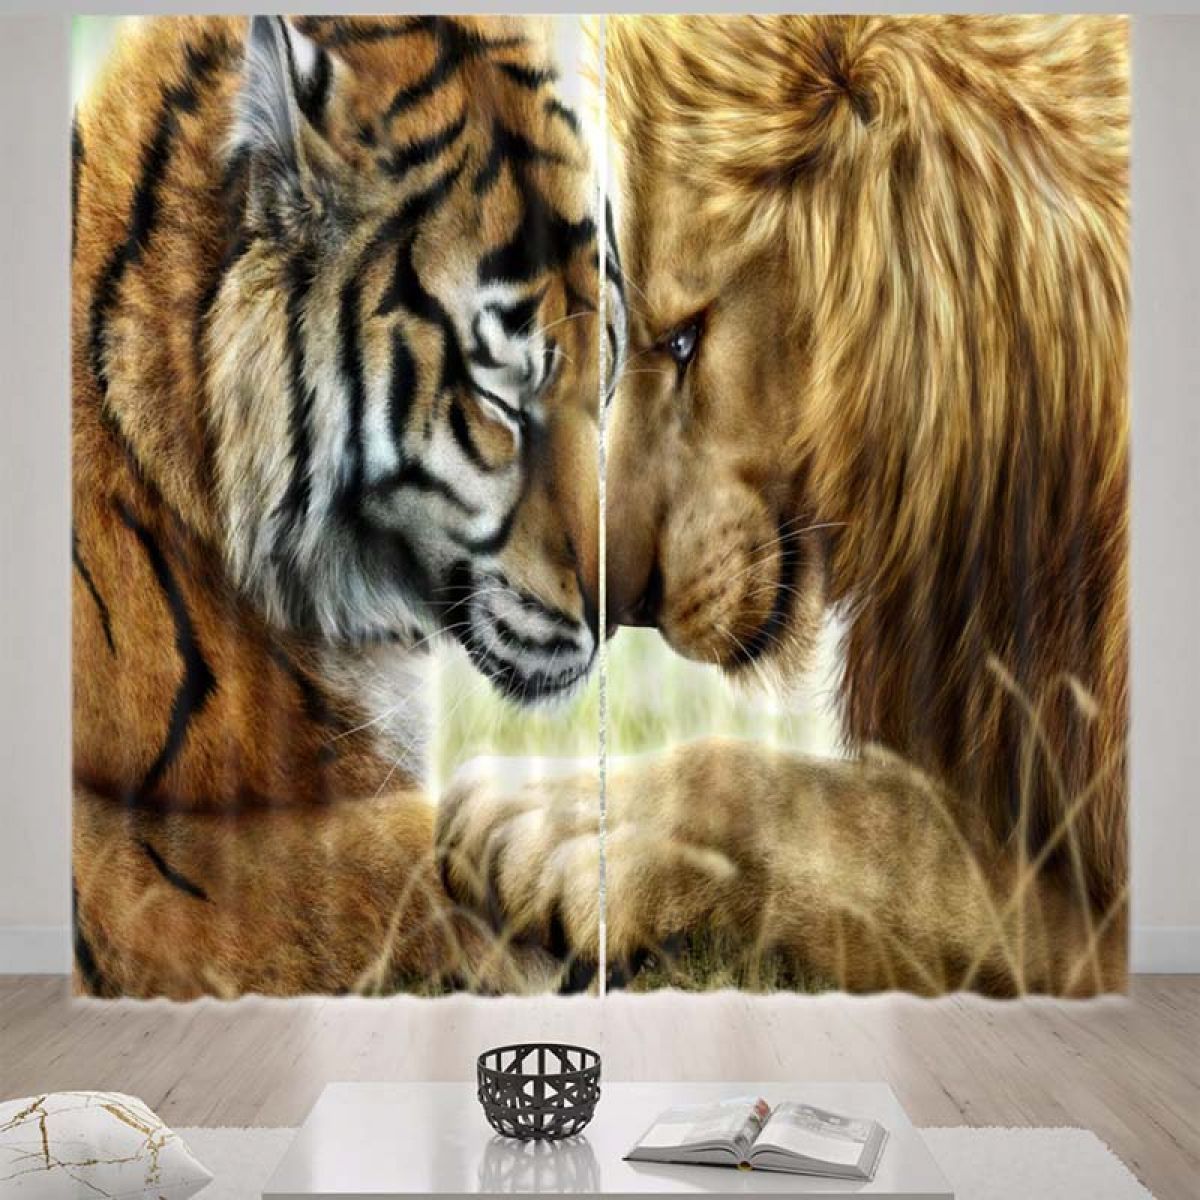 Tiger And Lion Printed Window Curtain Home Decor